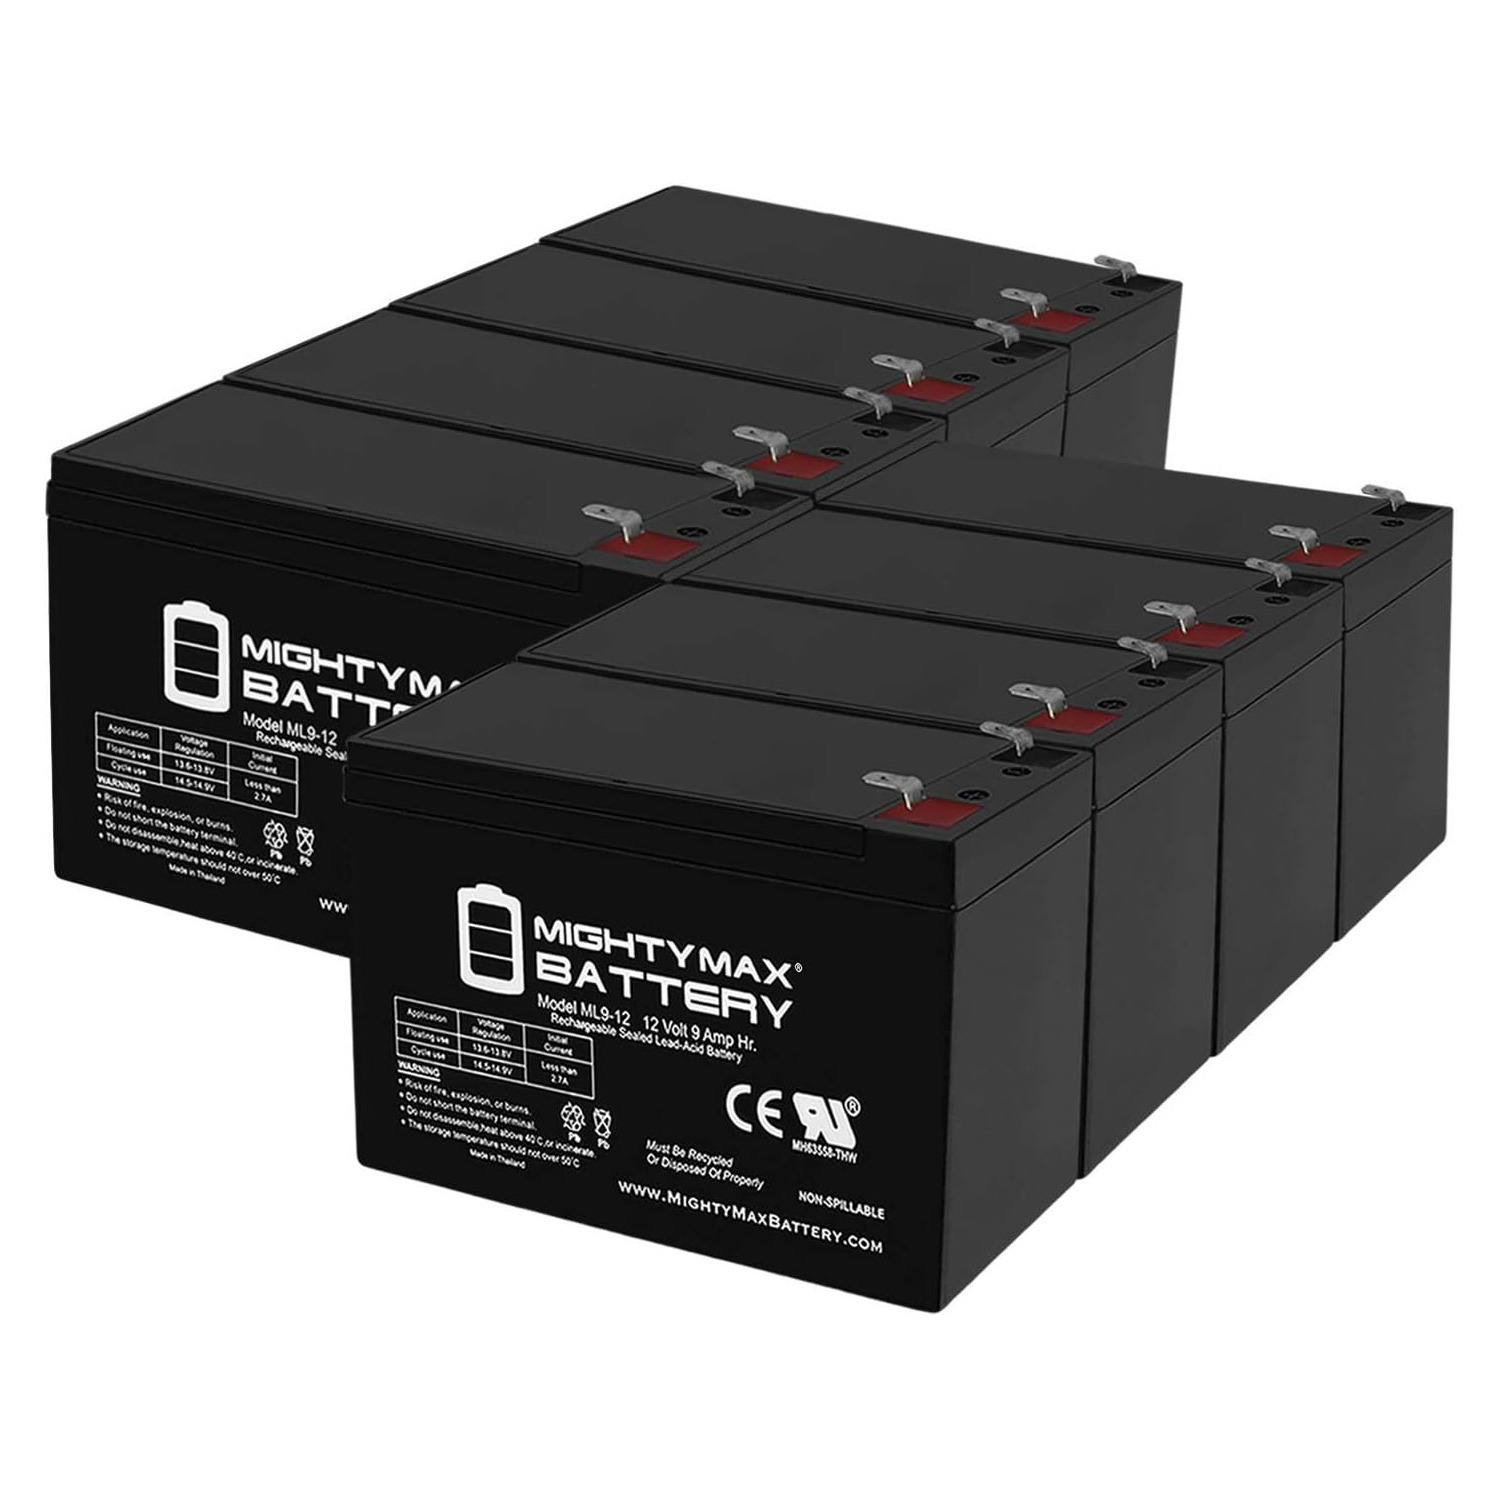 Altronix SMP3PMCTXPD16 12V, 9Ah Lead Acid Battery - 8 Pack